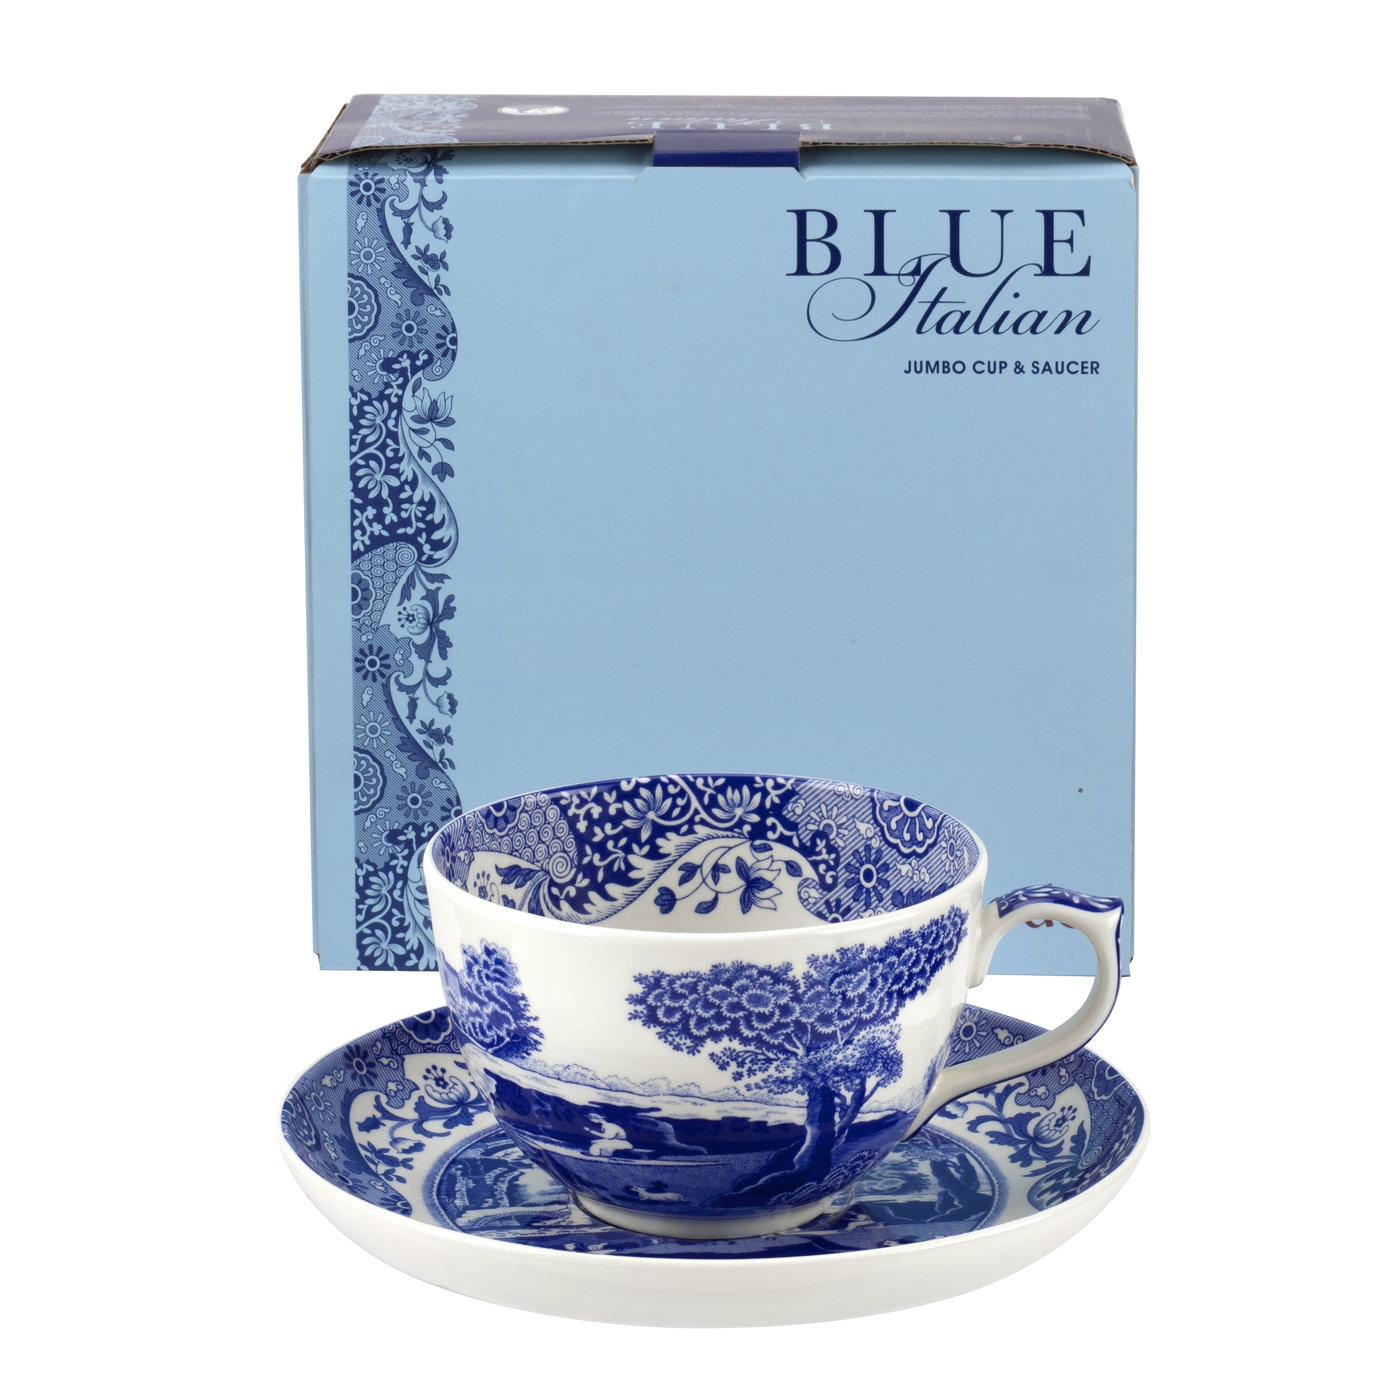 Blue Italian Jumbo Cup & Saucer Boxed Set image number null